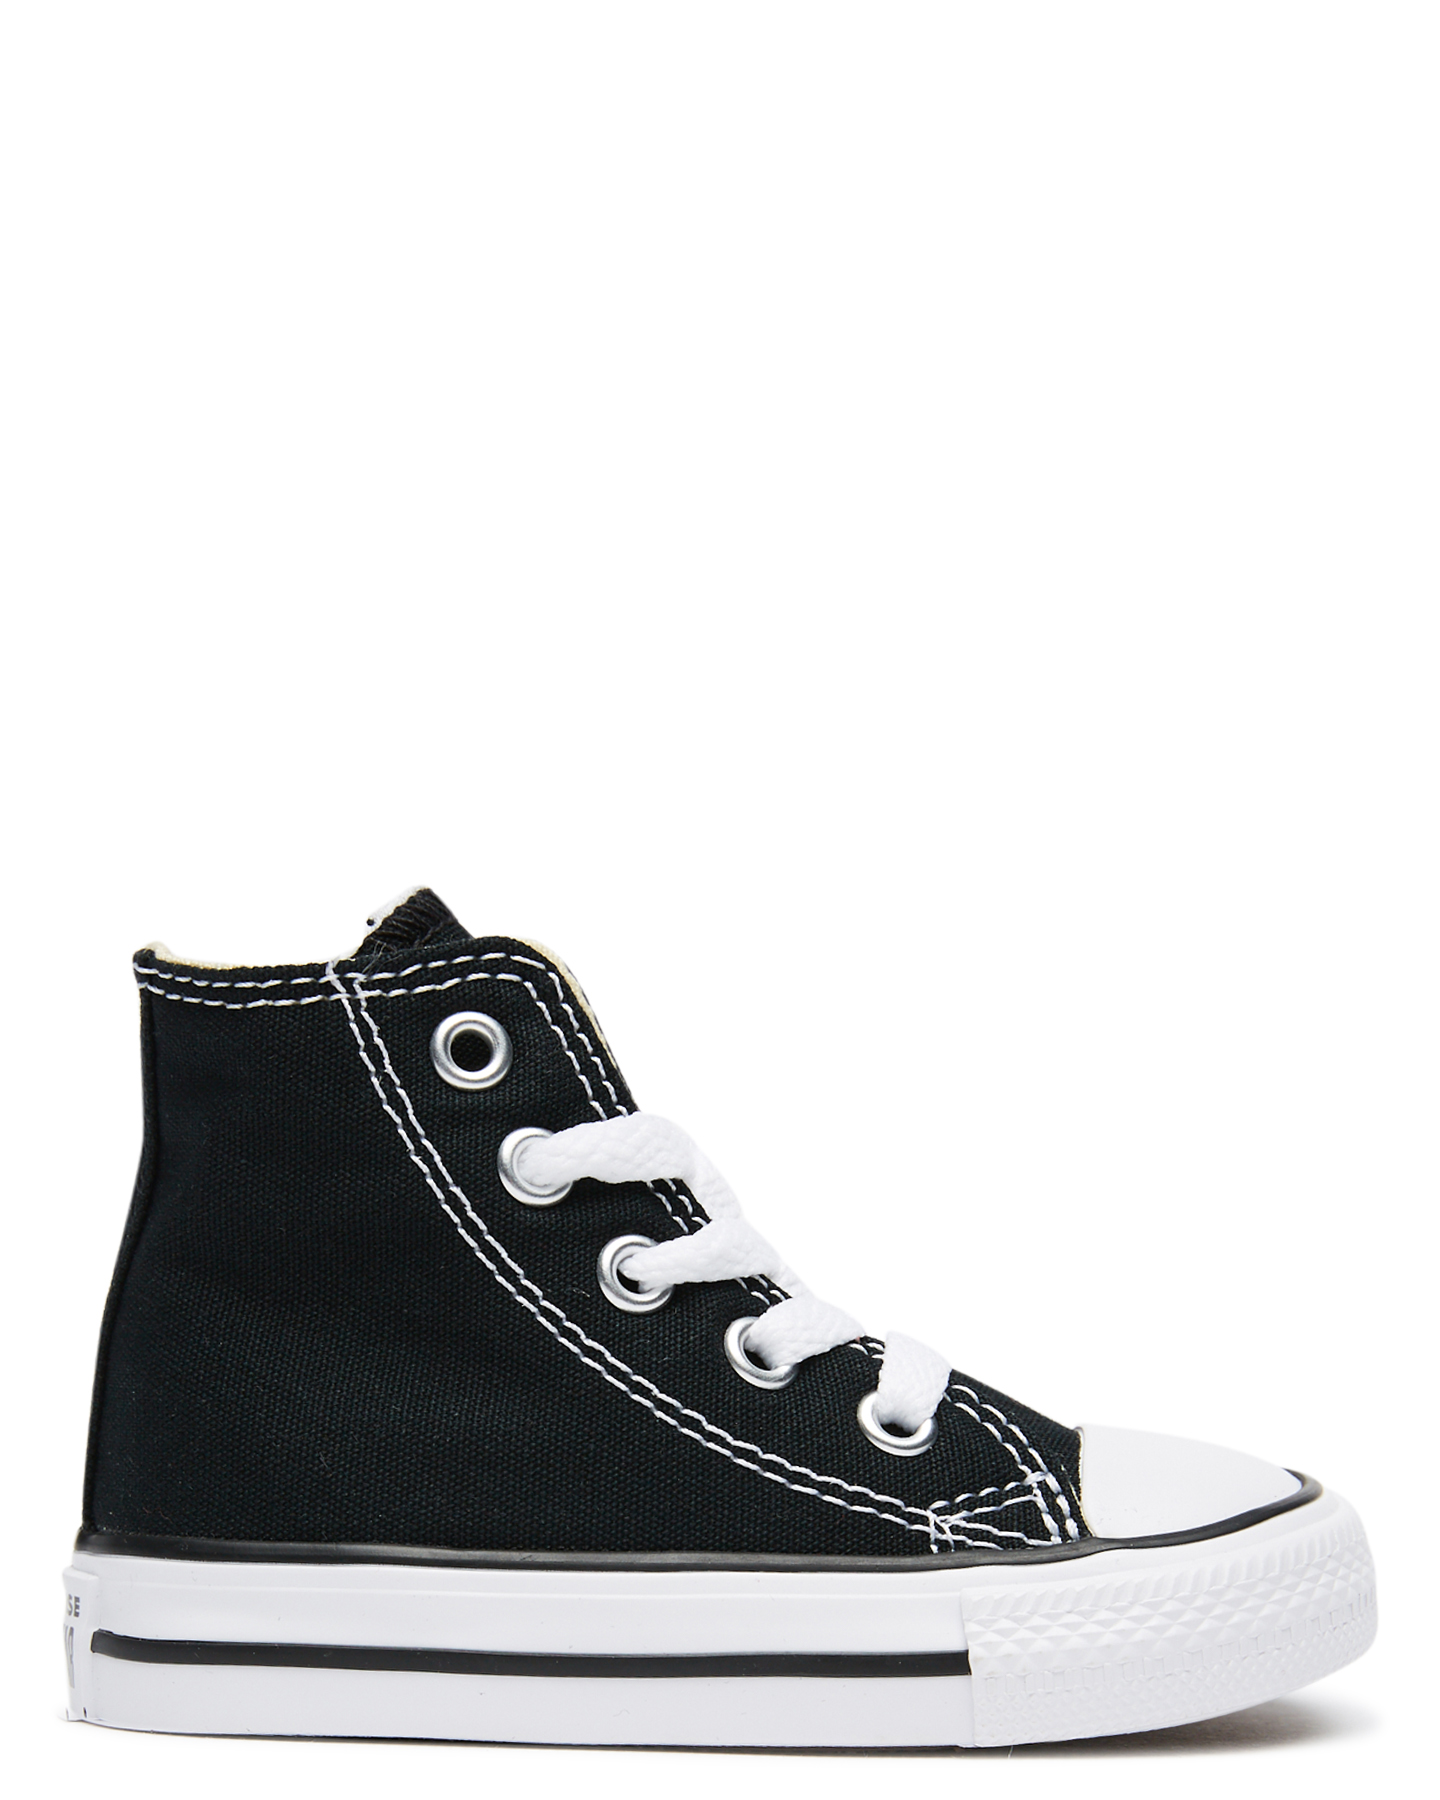 converse shoes for toddler boy